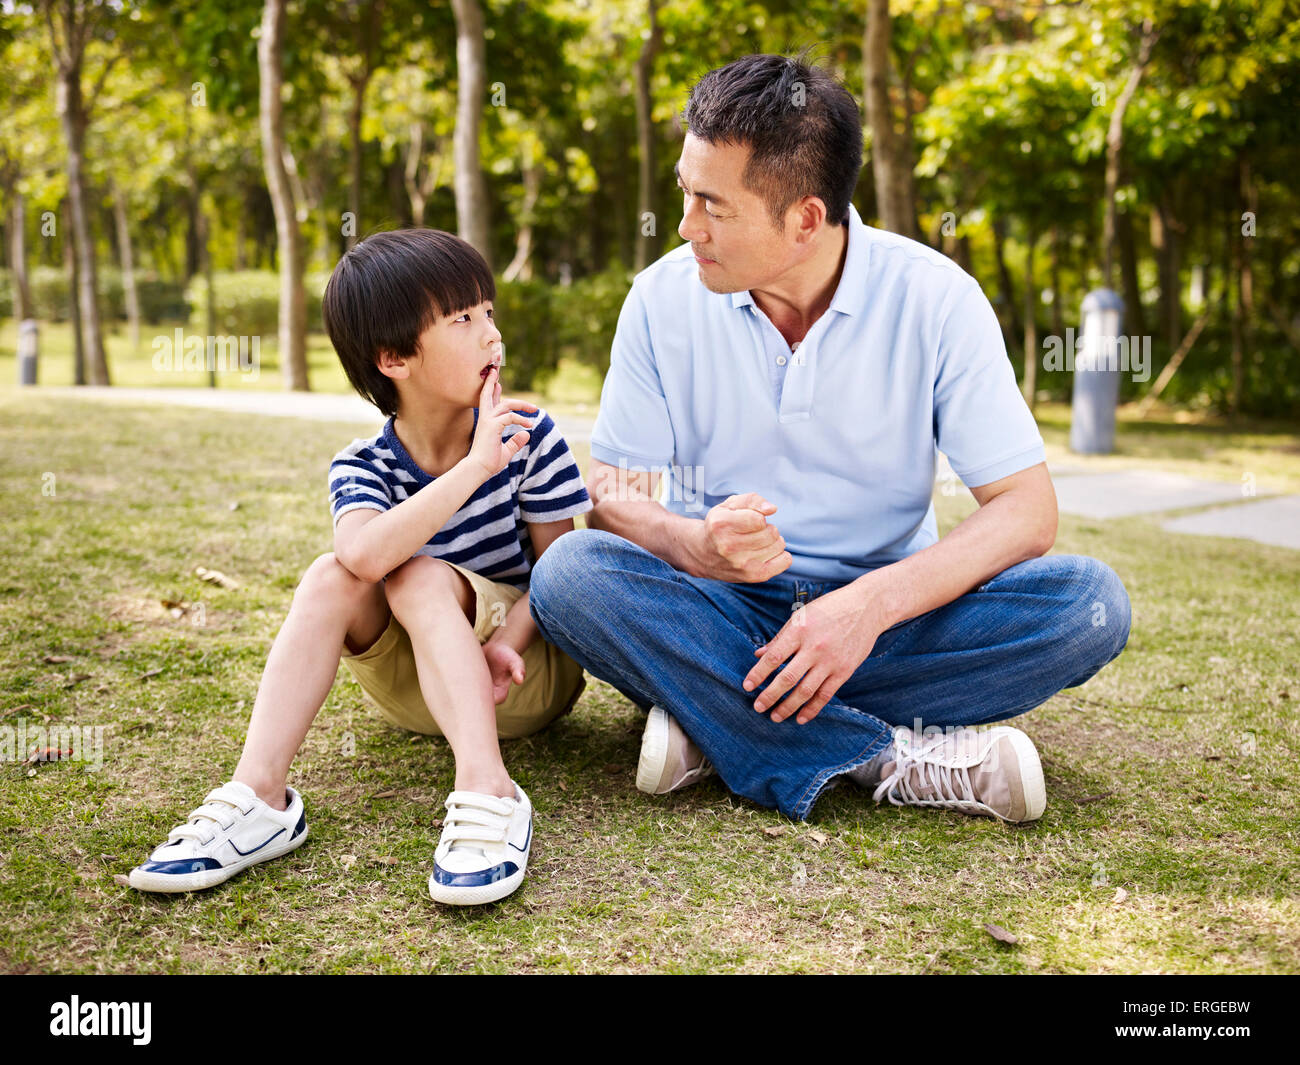 asian father encouraging child son Stock Photo